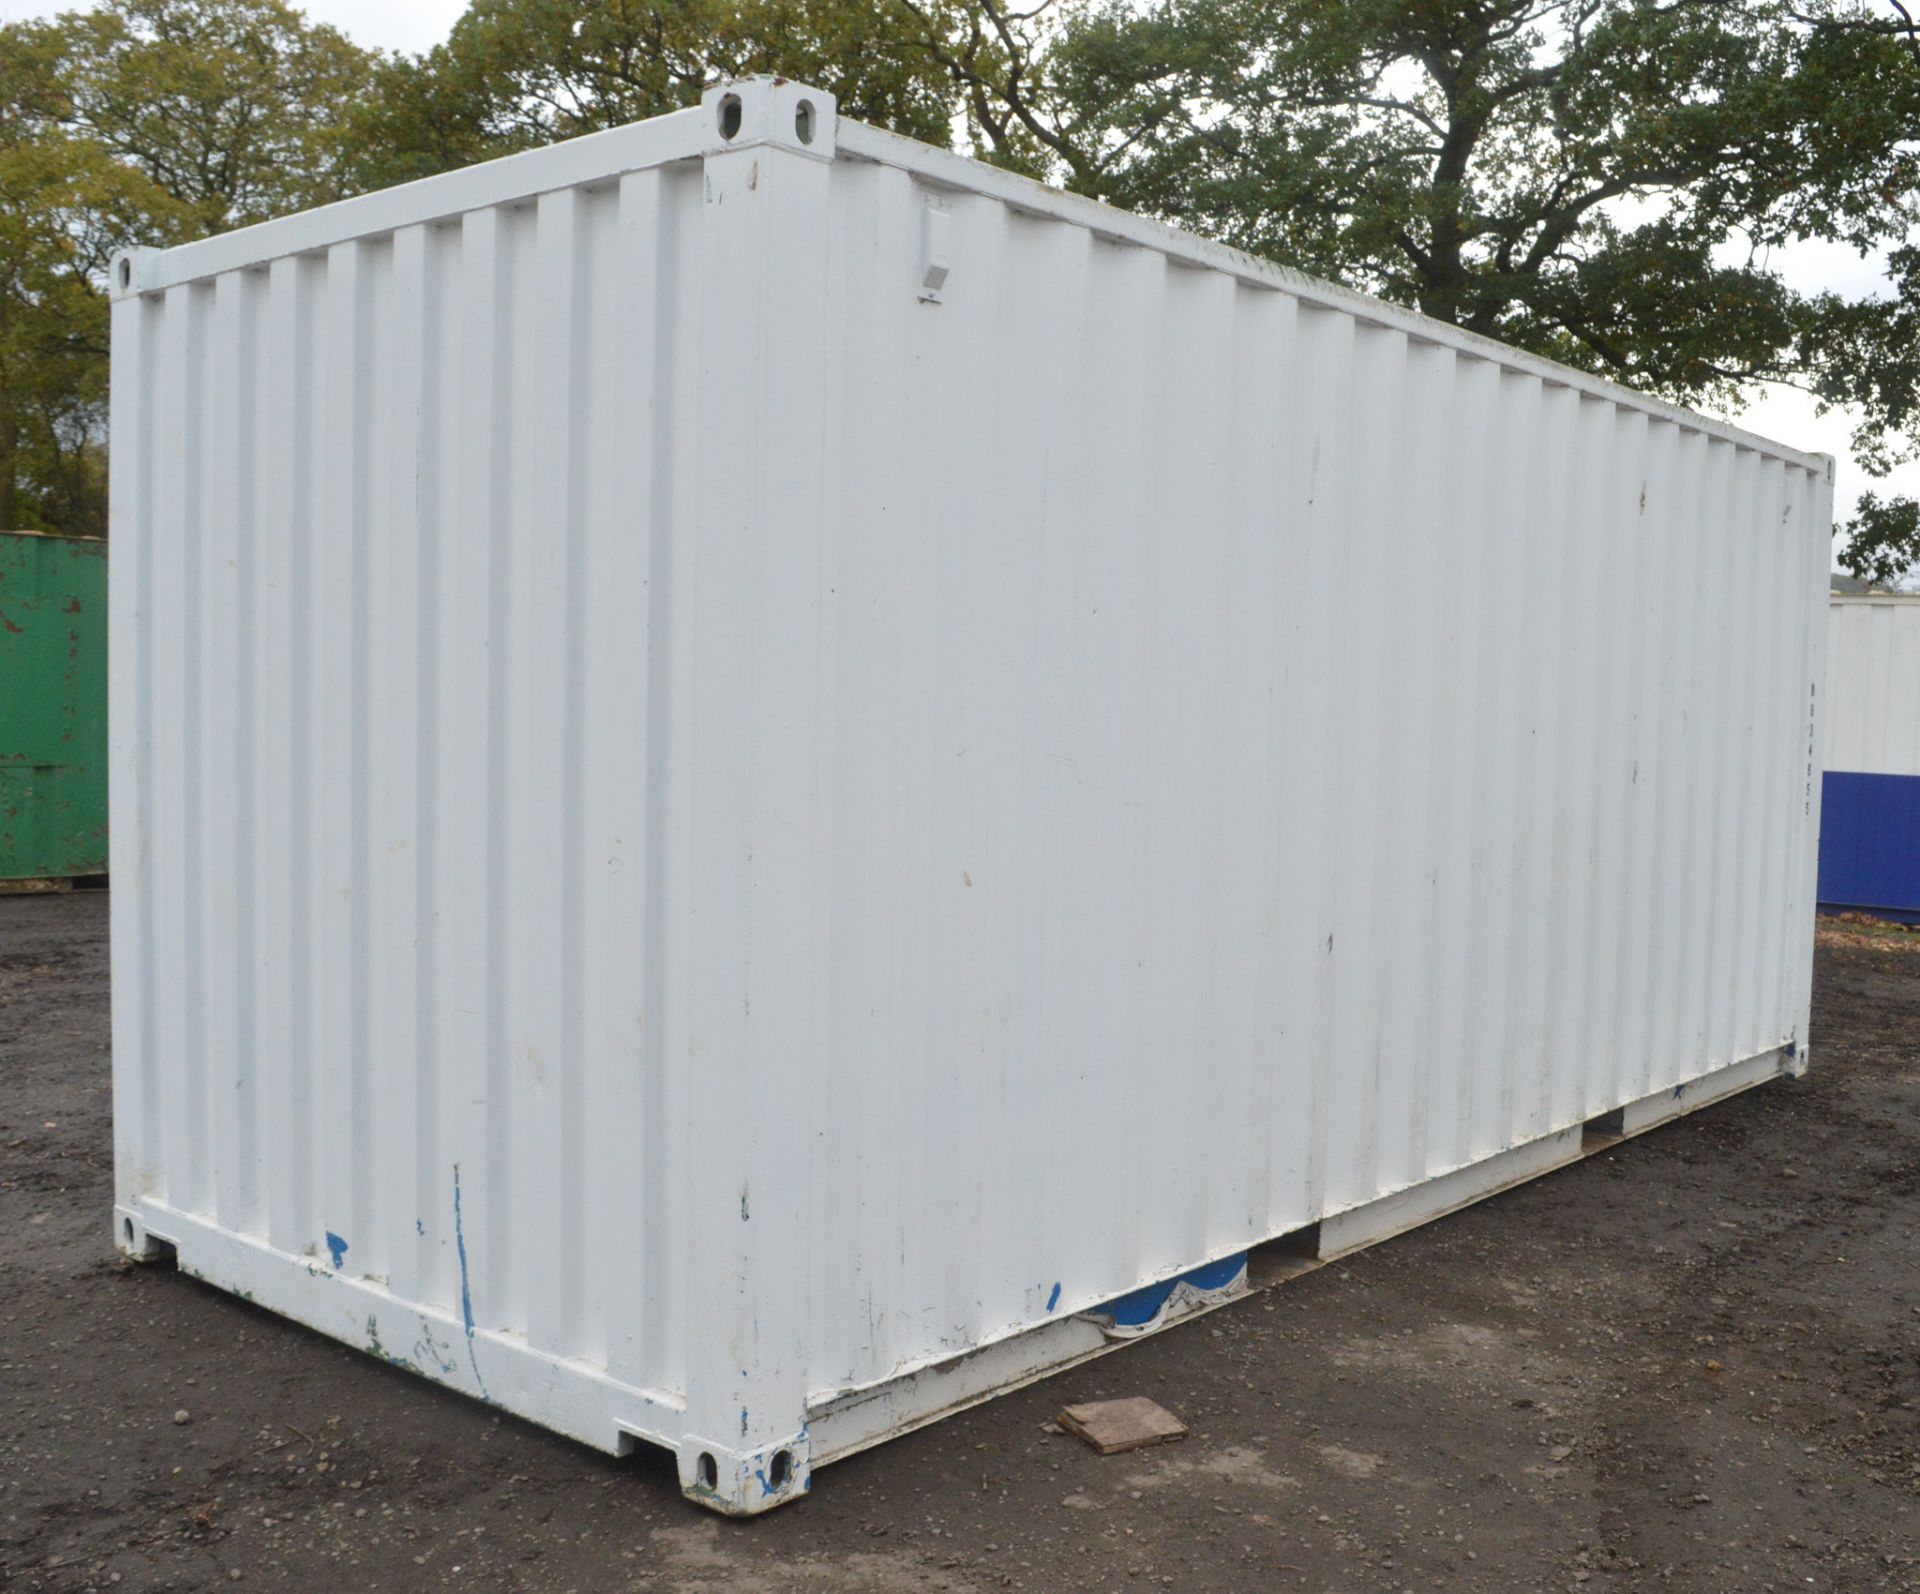 20 ft x 8 ft steel anti vandal shipping container BB34655 - Image 4 of 6